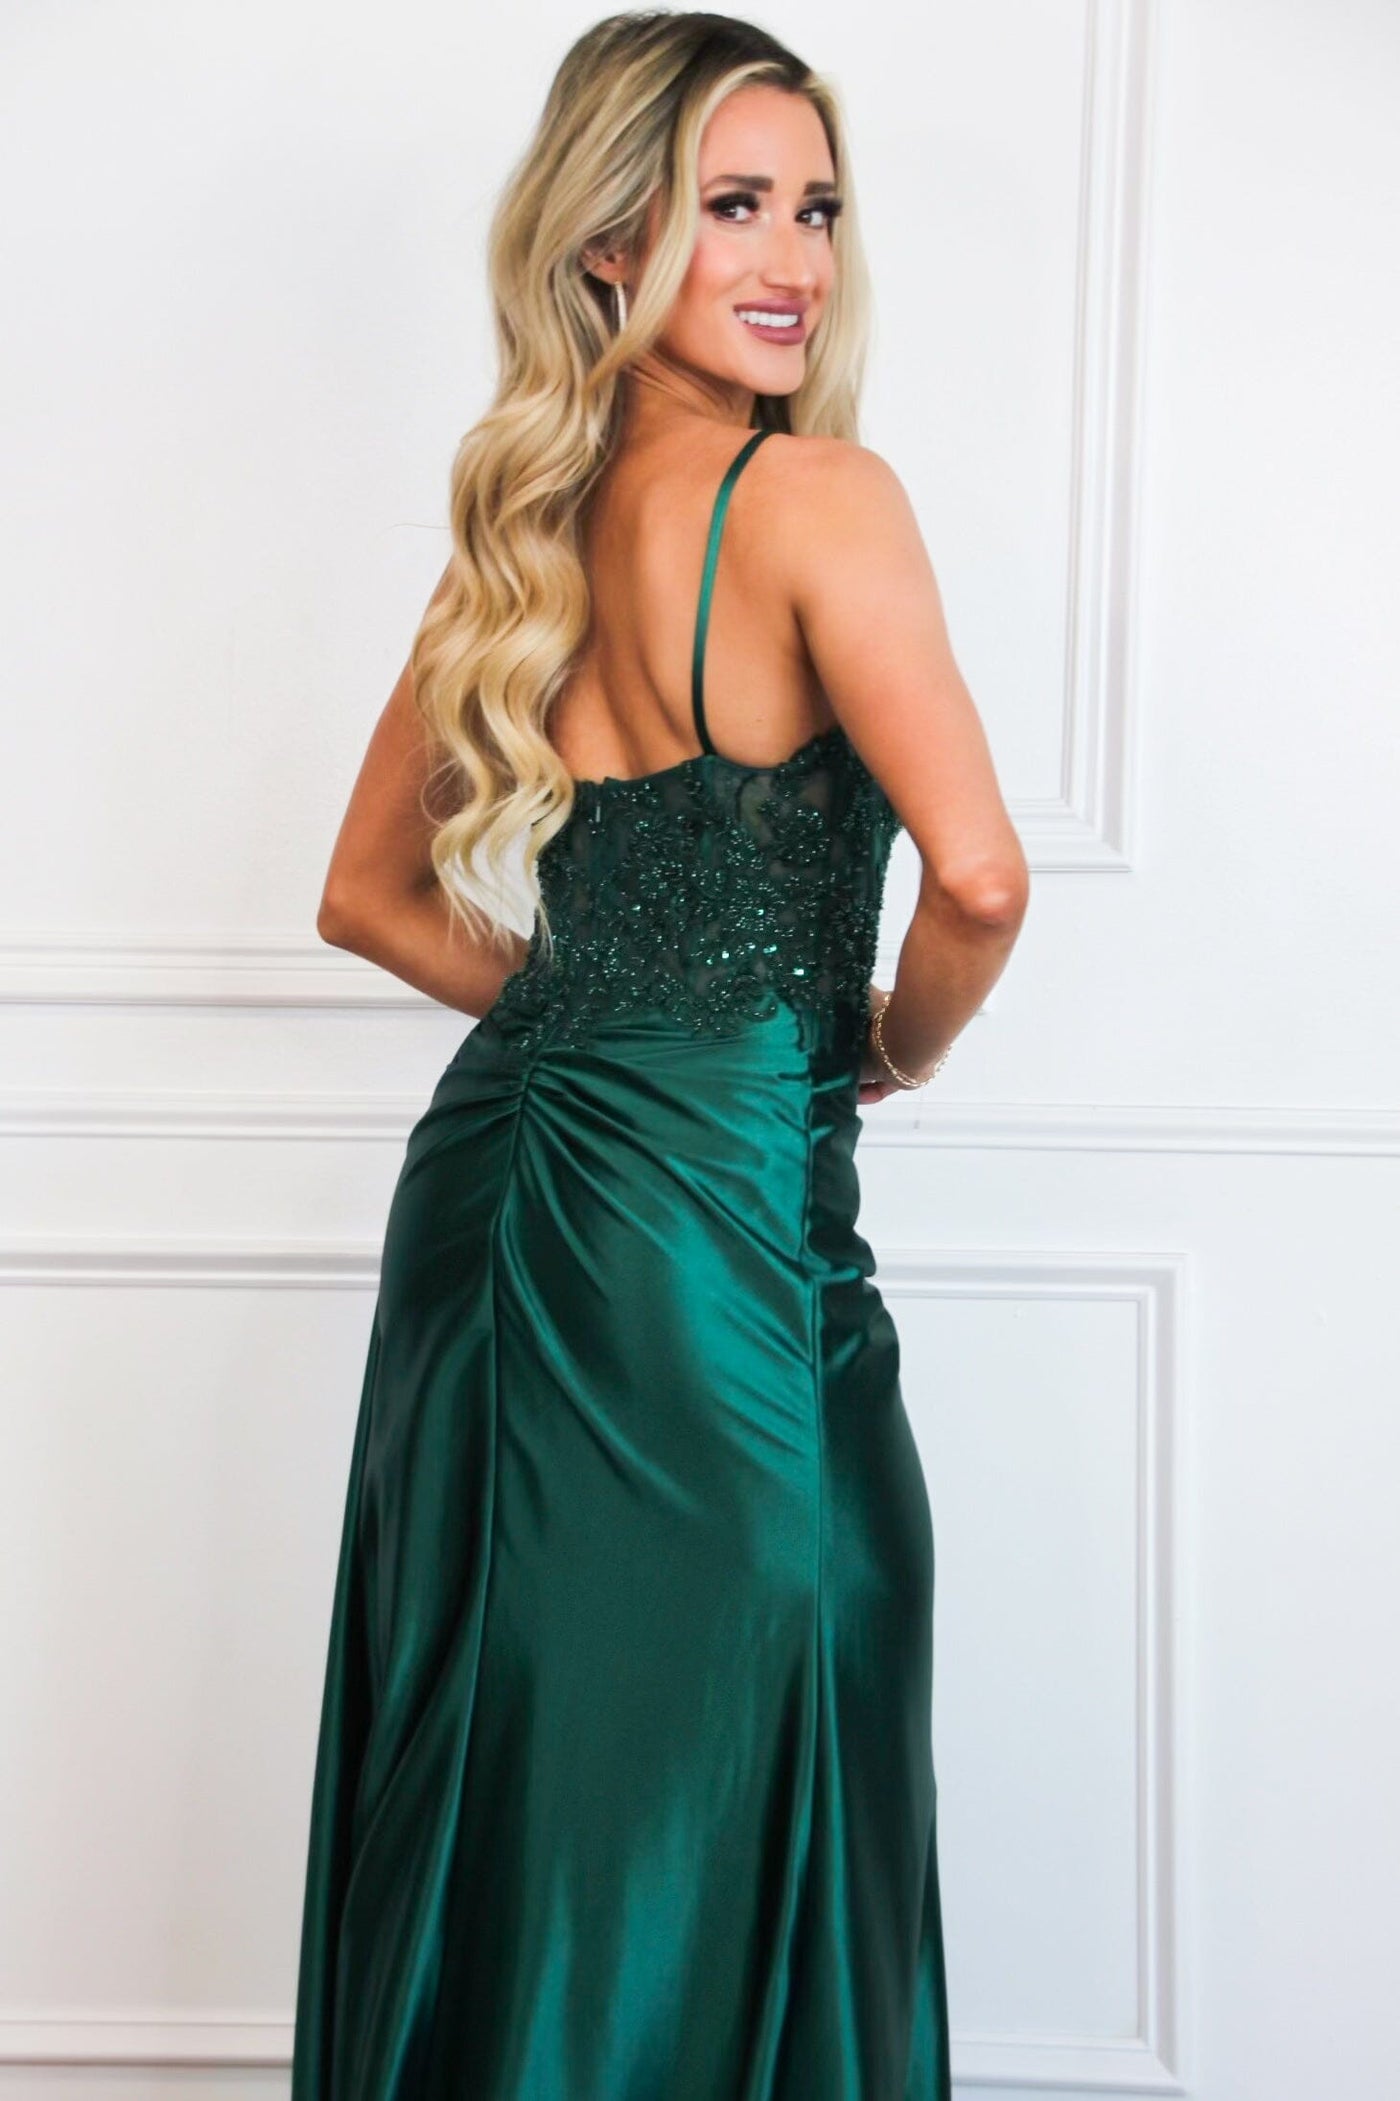 Victoria Sparkly Lace Satin Bustier Formal Dress: Emerald - Bella and Bloom Boutique